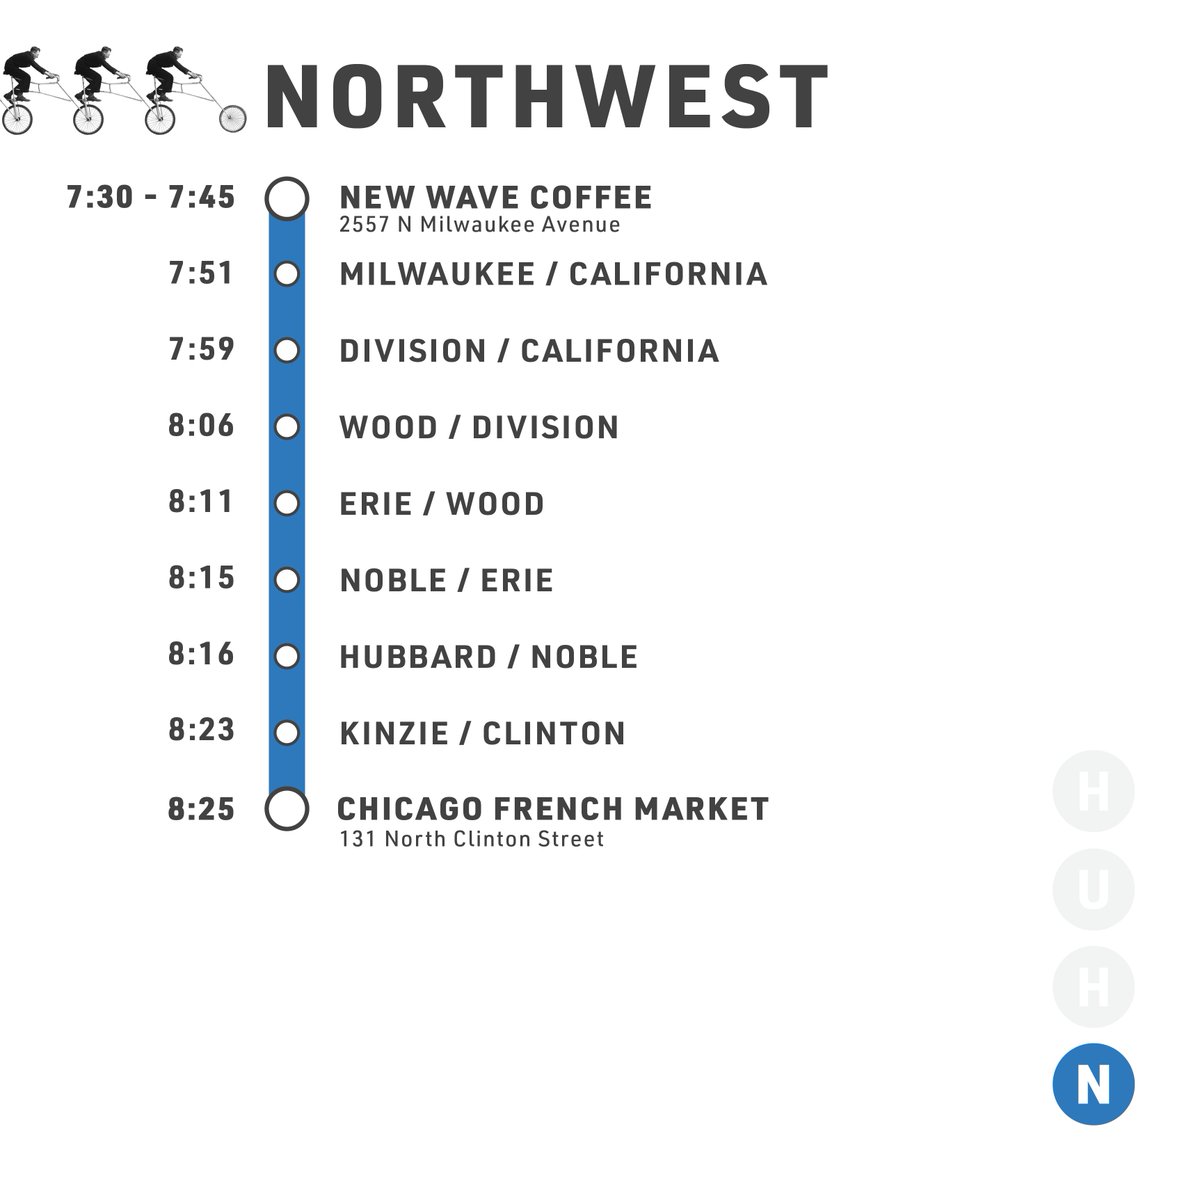 It's gonna be sunny tomorrow! Come join us on our weekly Bike Buses to the Loop on Wednesday mornings! 10mph to the French Market. Hop on/off wherever you’d like! All wheels welcome! Check the status of your route and track the bus at bikebustracker.bikegridnow.org.